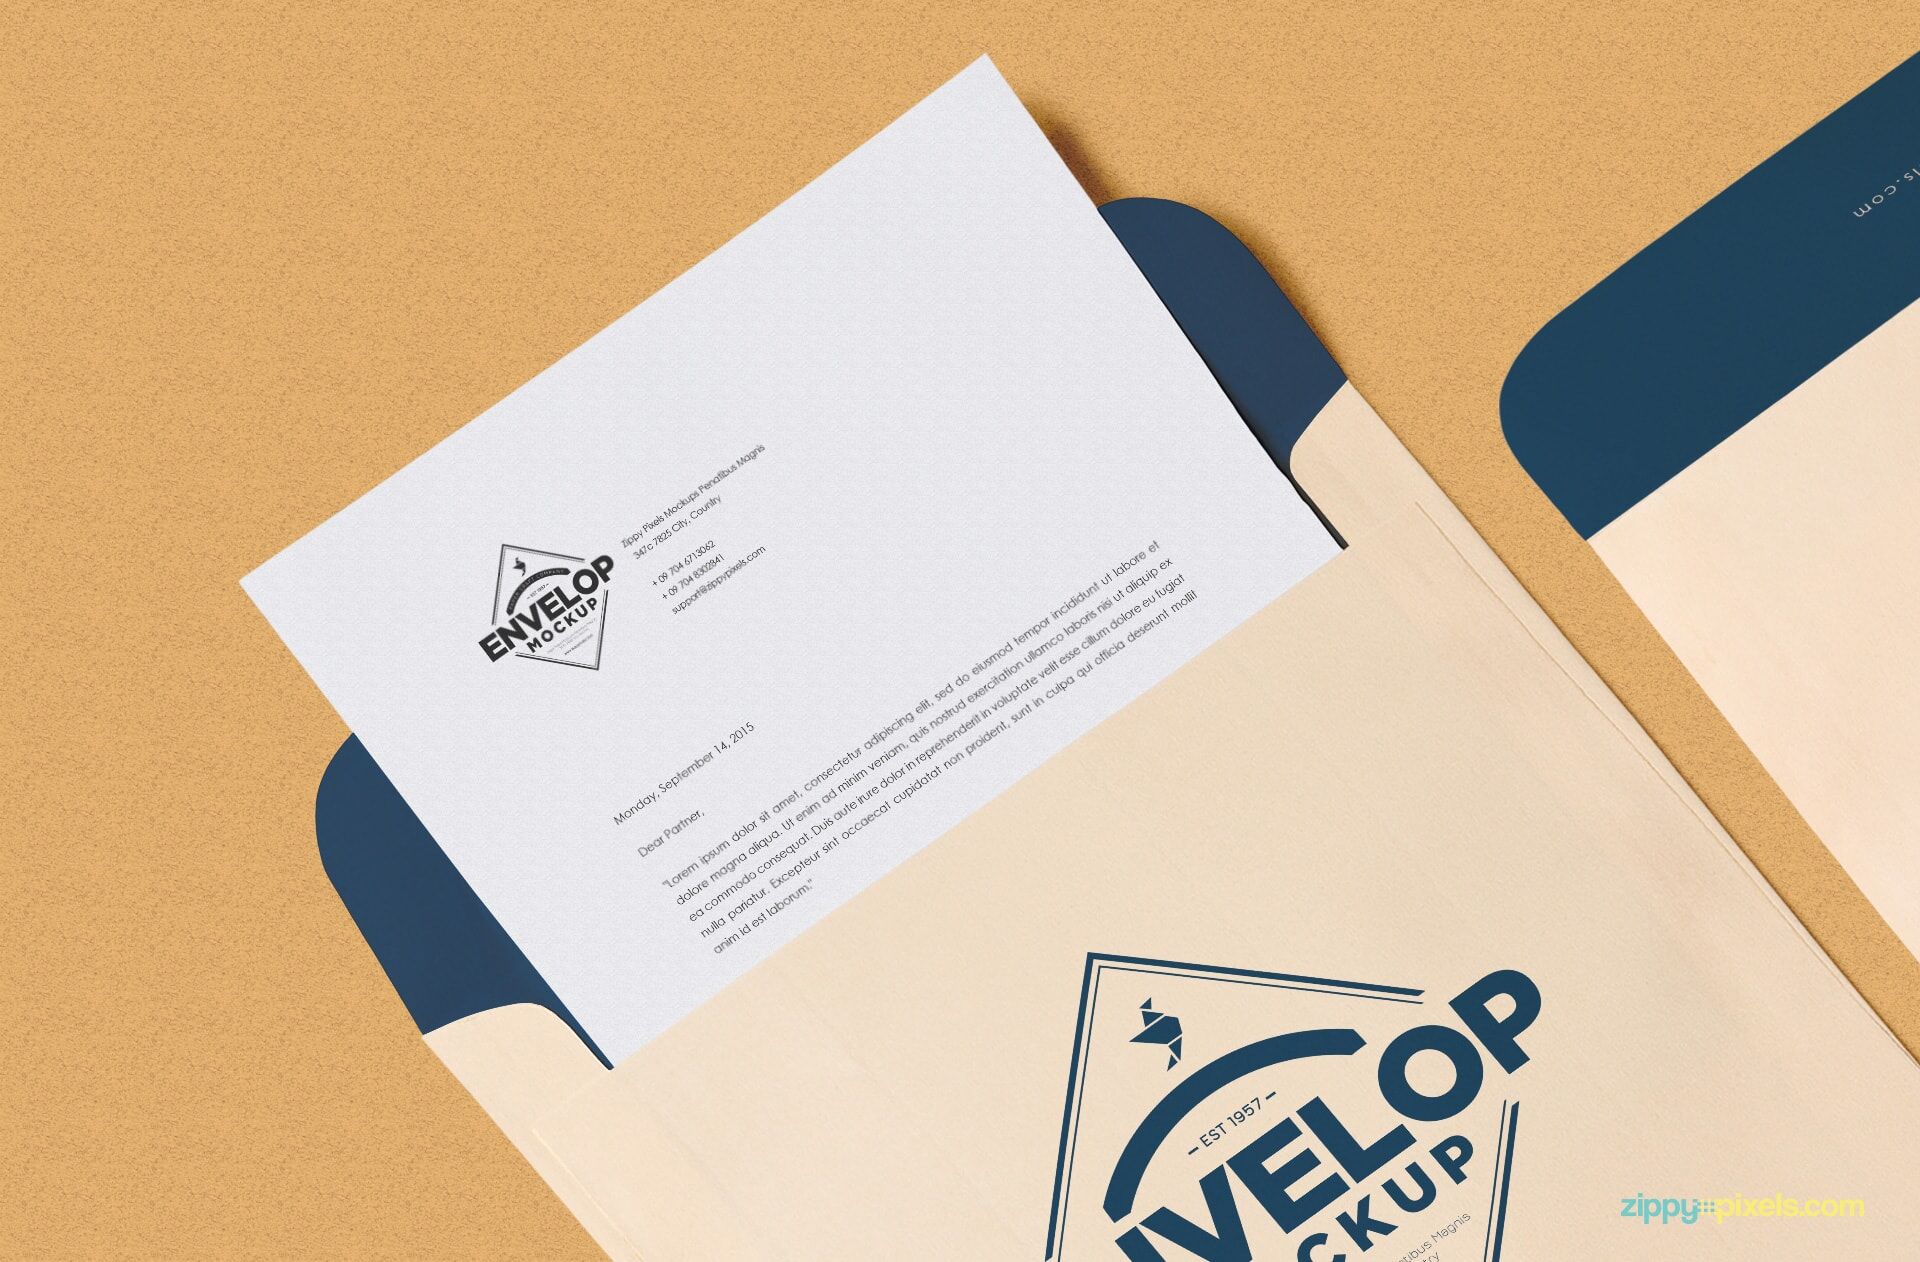 Squared Shaped Envelope Mockup With Letterhead FREE PSD